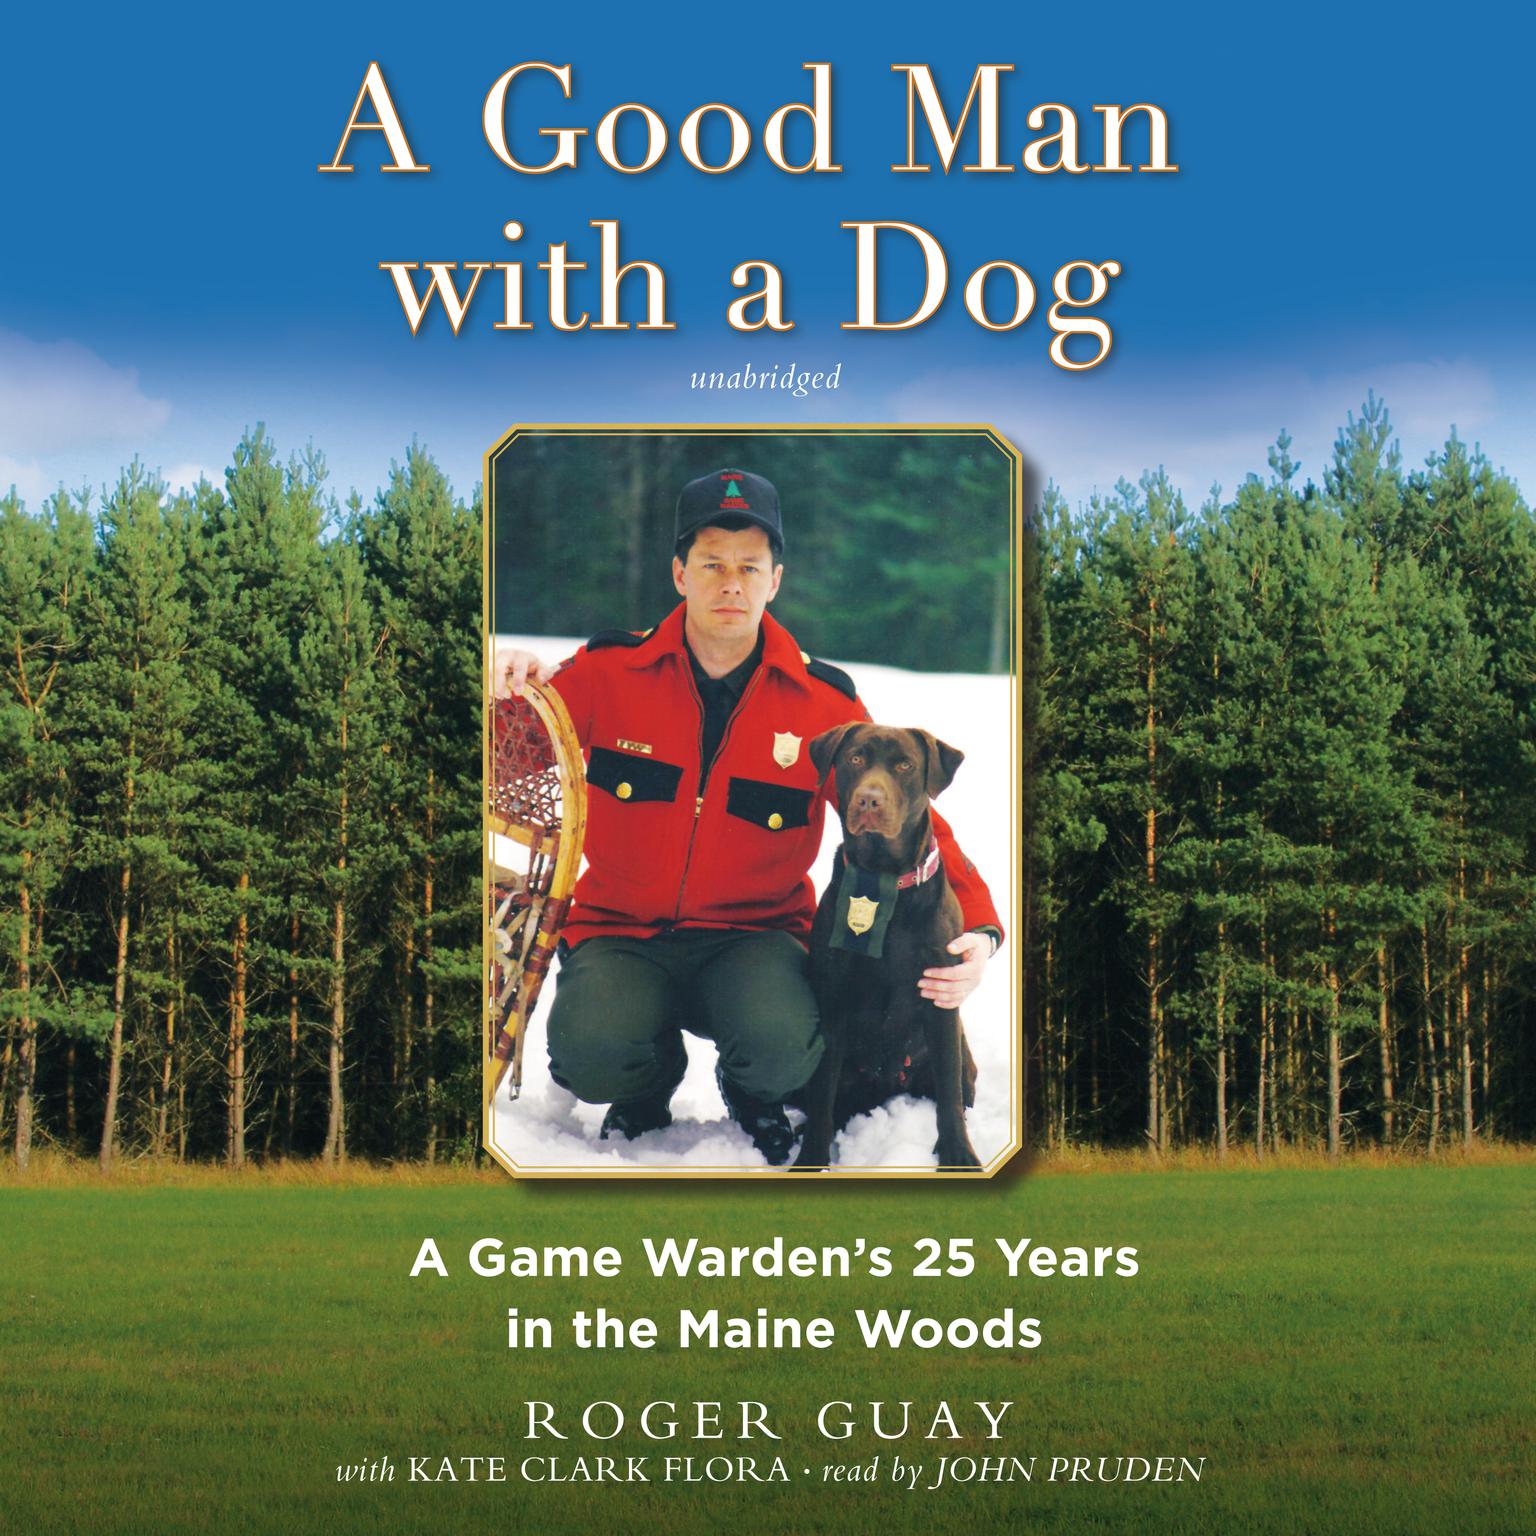 A Good Man with a Dog: A Game Warden’s 25 Years in the Maine Woods Audiobook, by Roger Guay